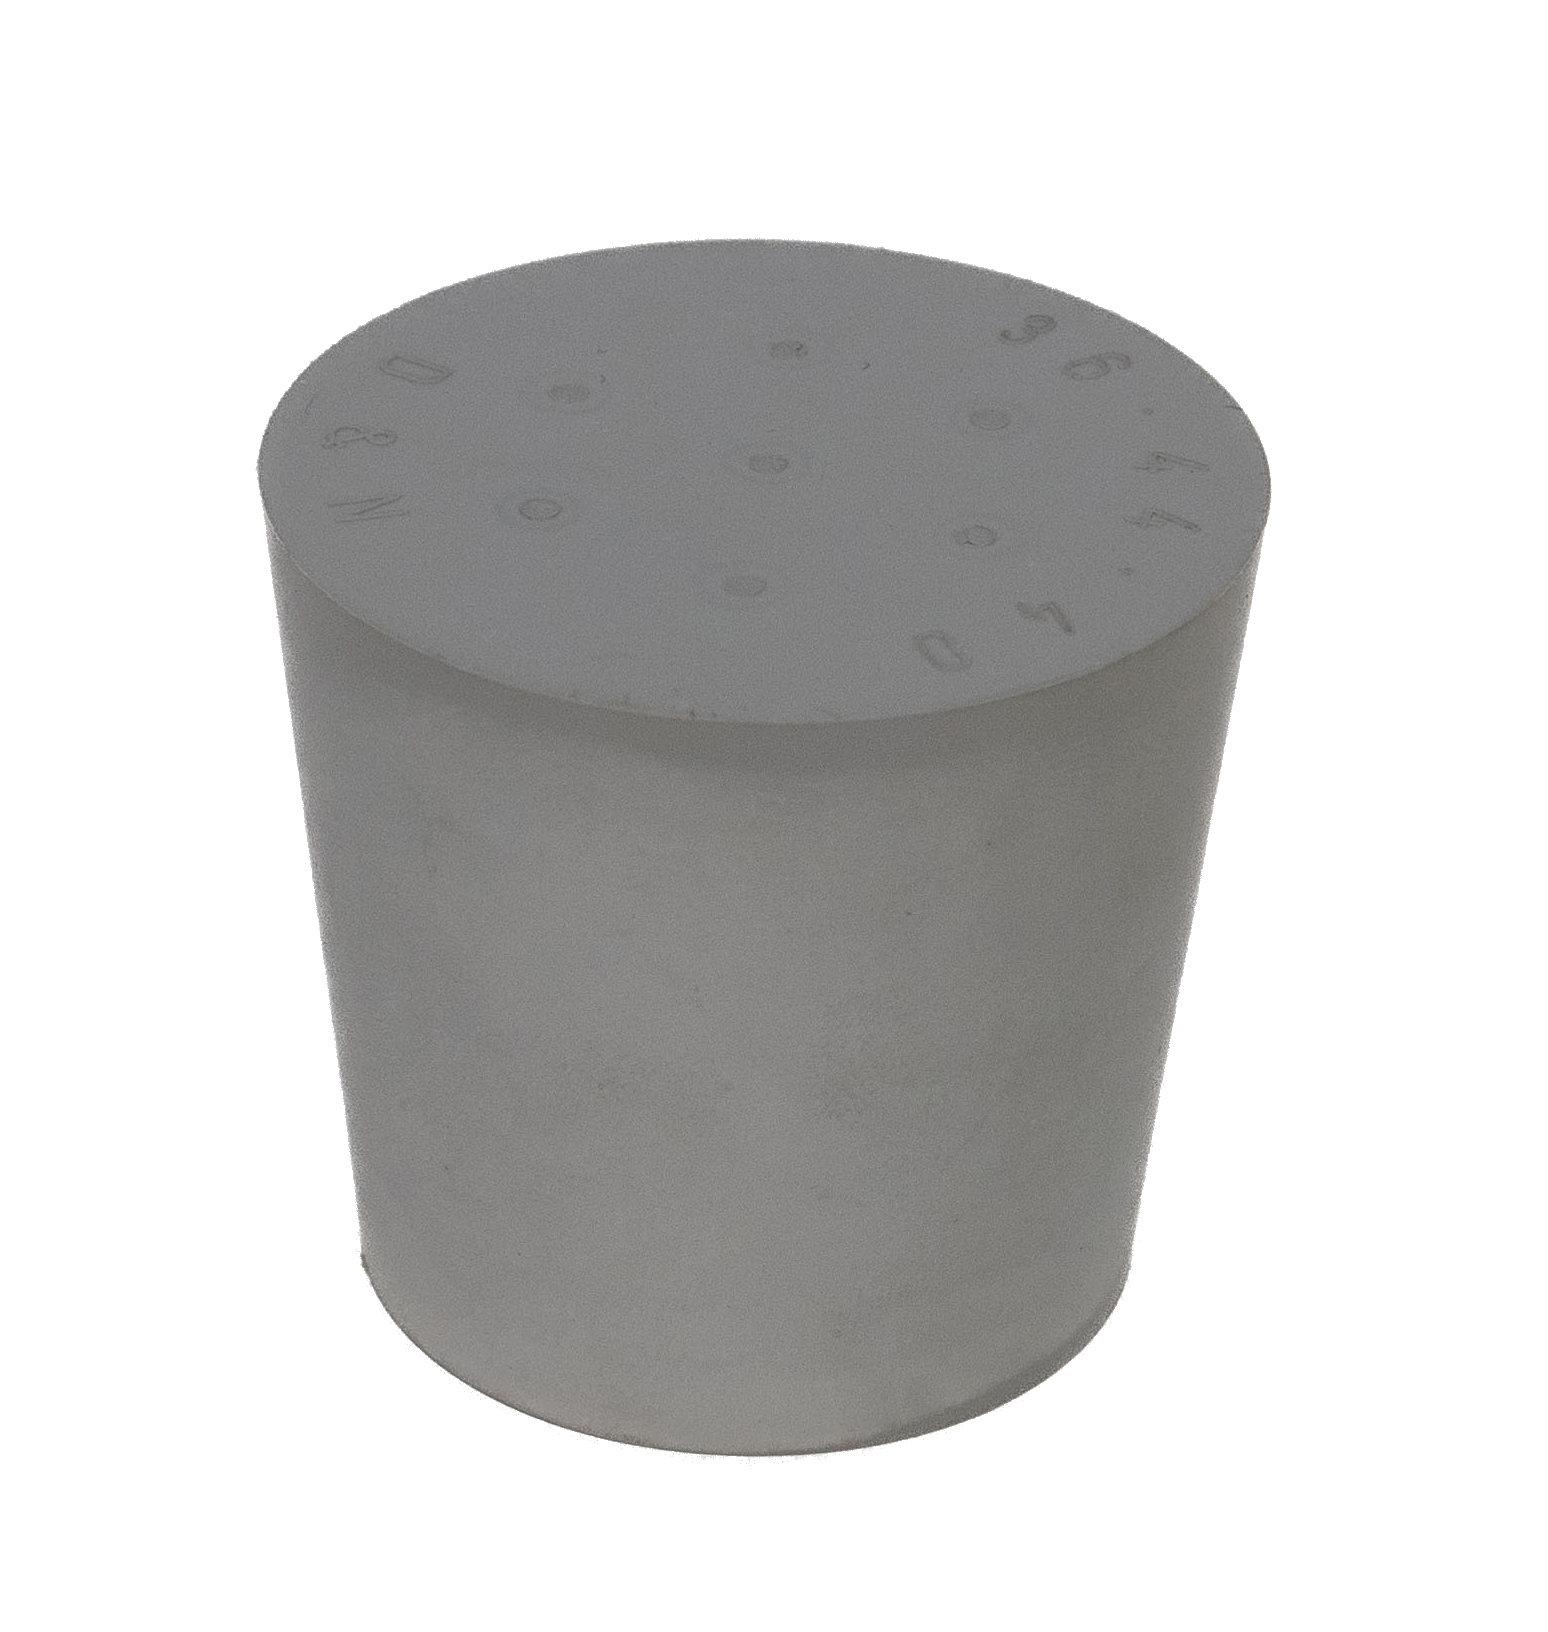 Rubber stopper grey 36 x 44 mm without hole